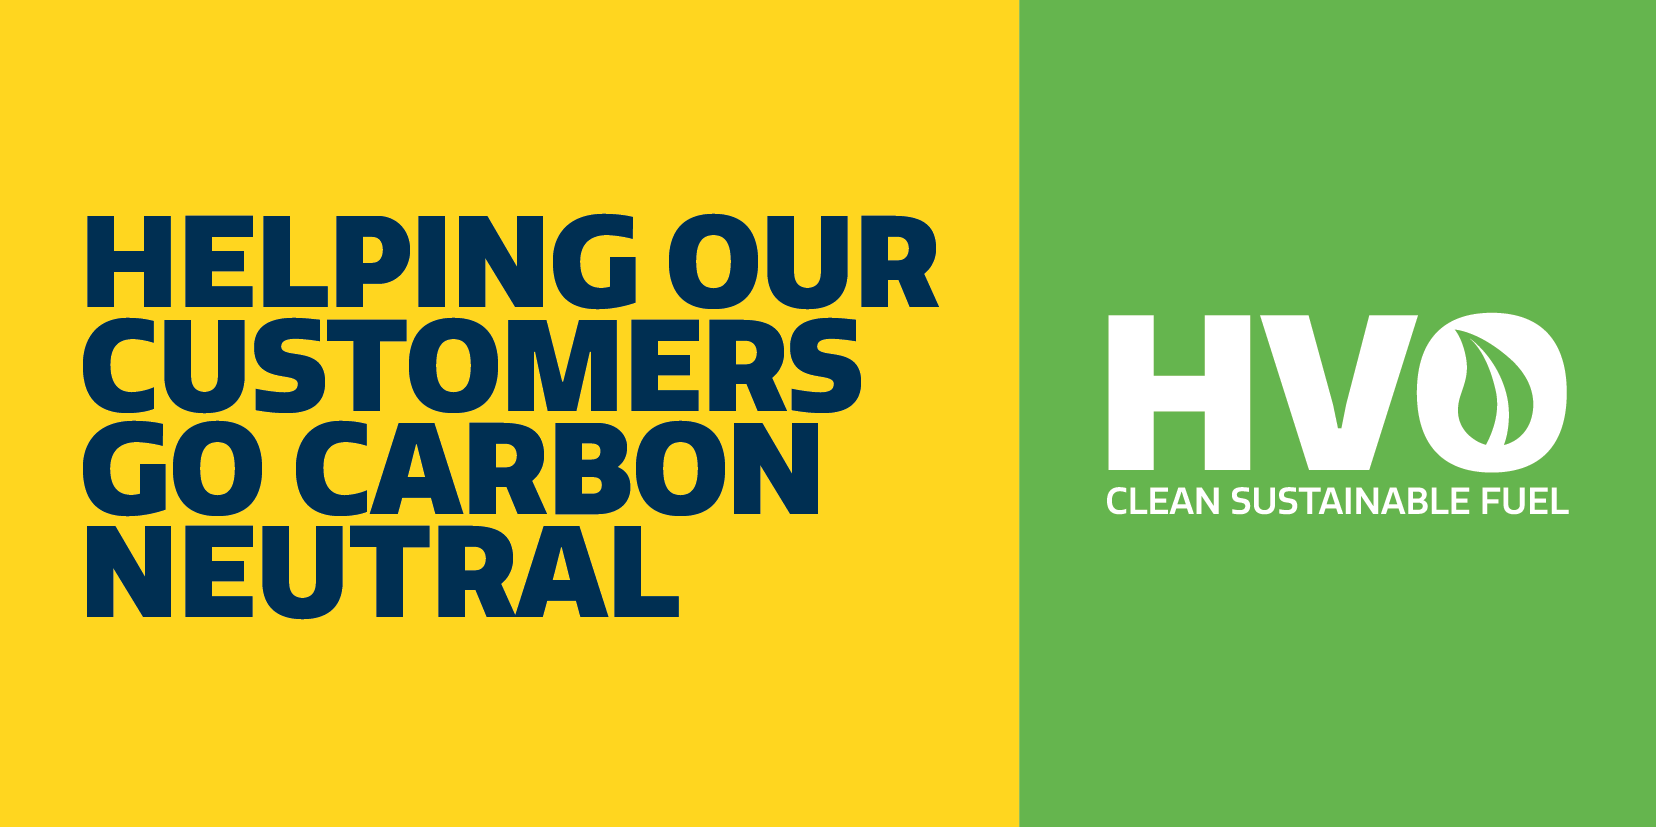 hvo fuel - Helping Our Customers Go Carbon Neutral